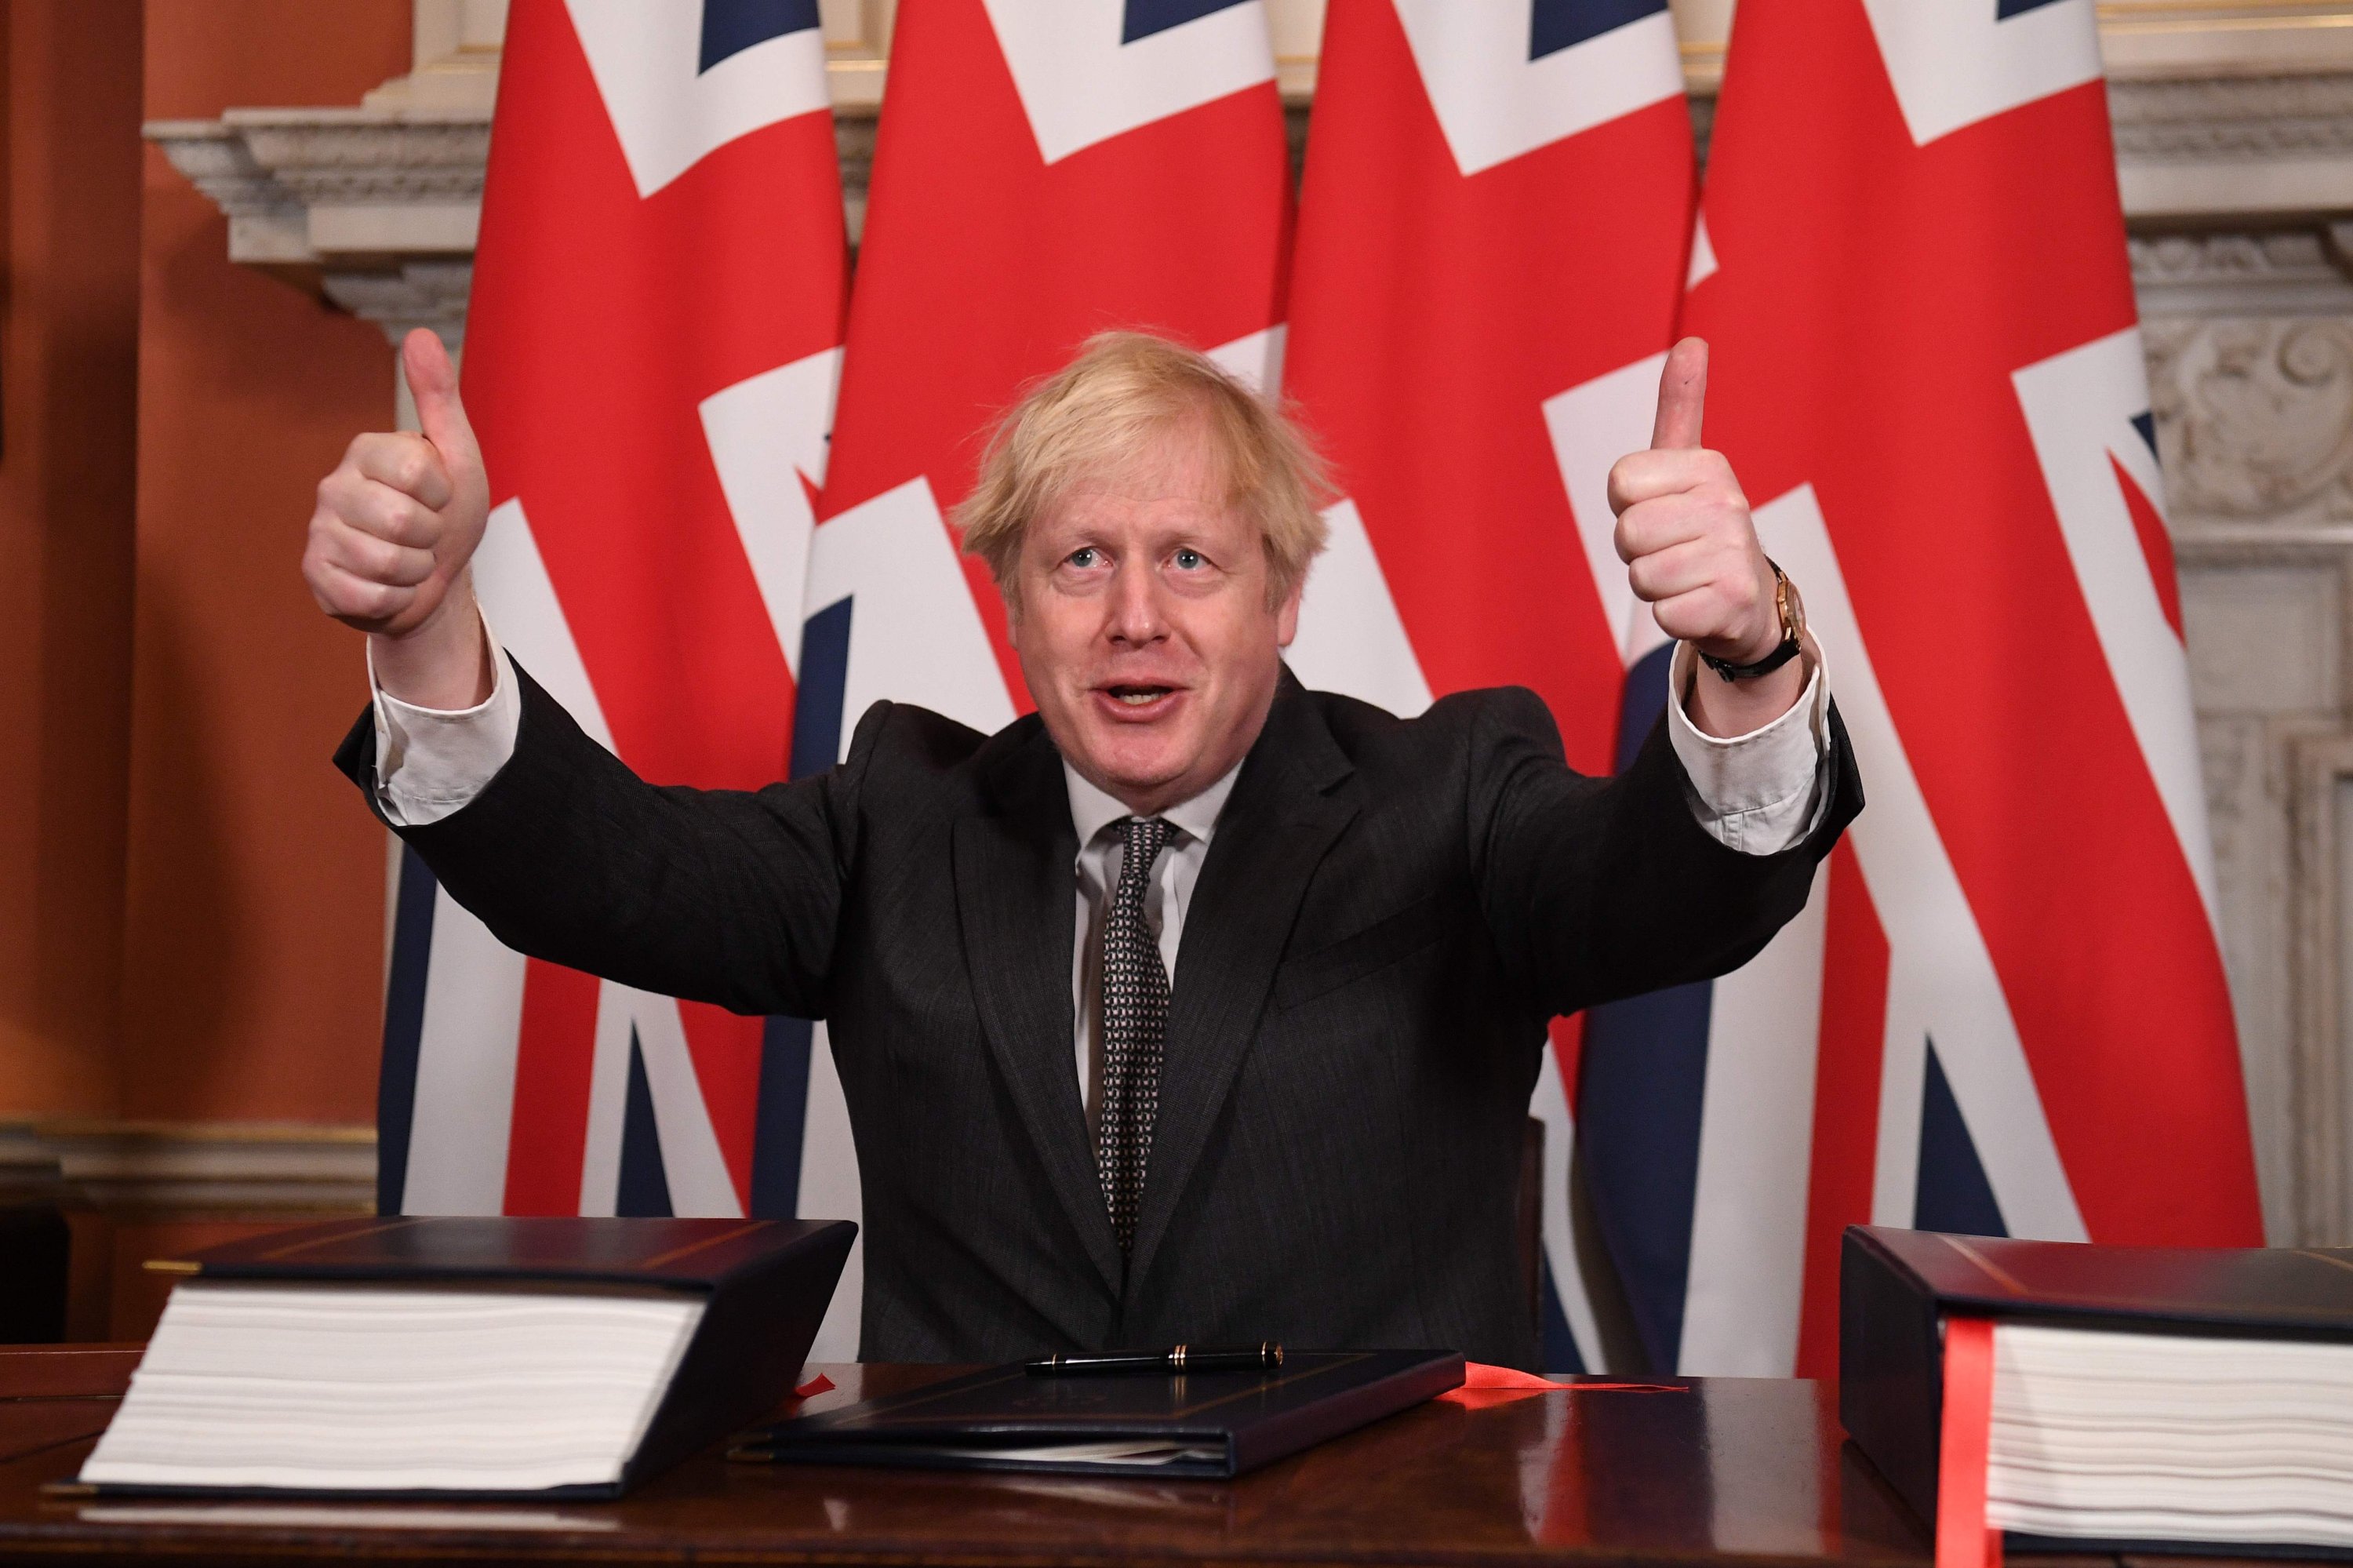 Britain's Prime Minister Boris Johnson gives a double thumbs up after signing the Trade and Cooperation Agreement between the U.K. and the EU, the Brexit trade deal, at 10 Downing Street, central London on Dec. 30, 2020. (AFP Photo)
